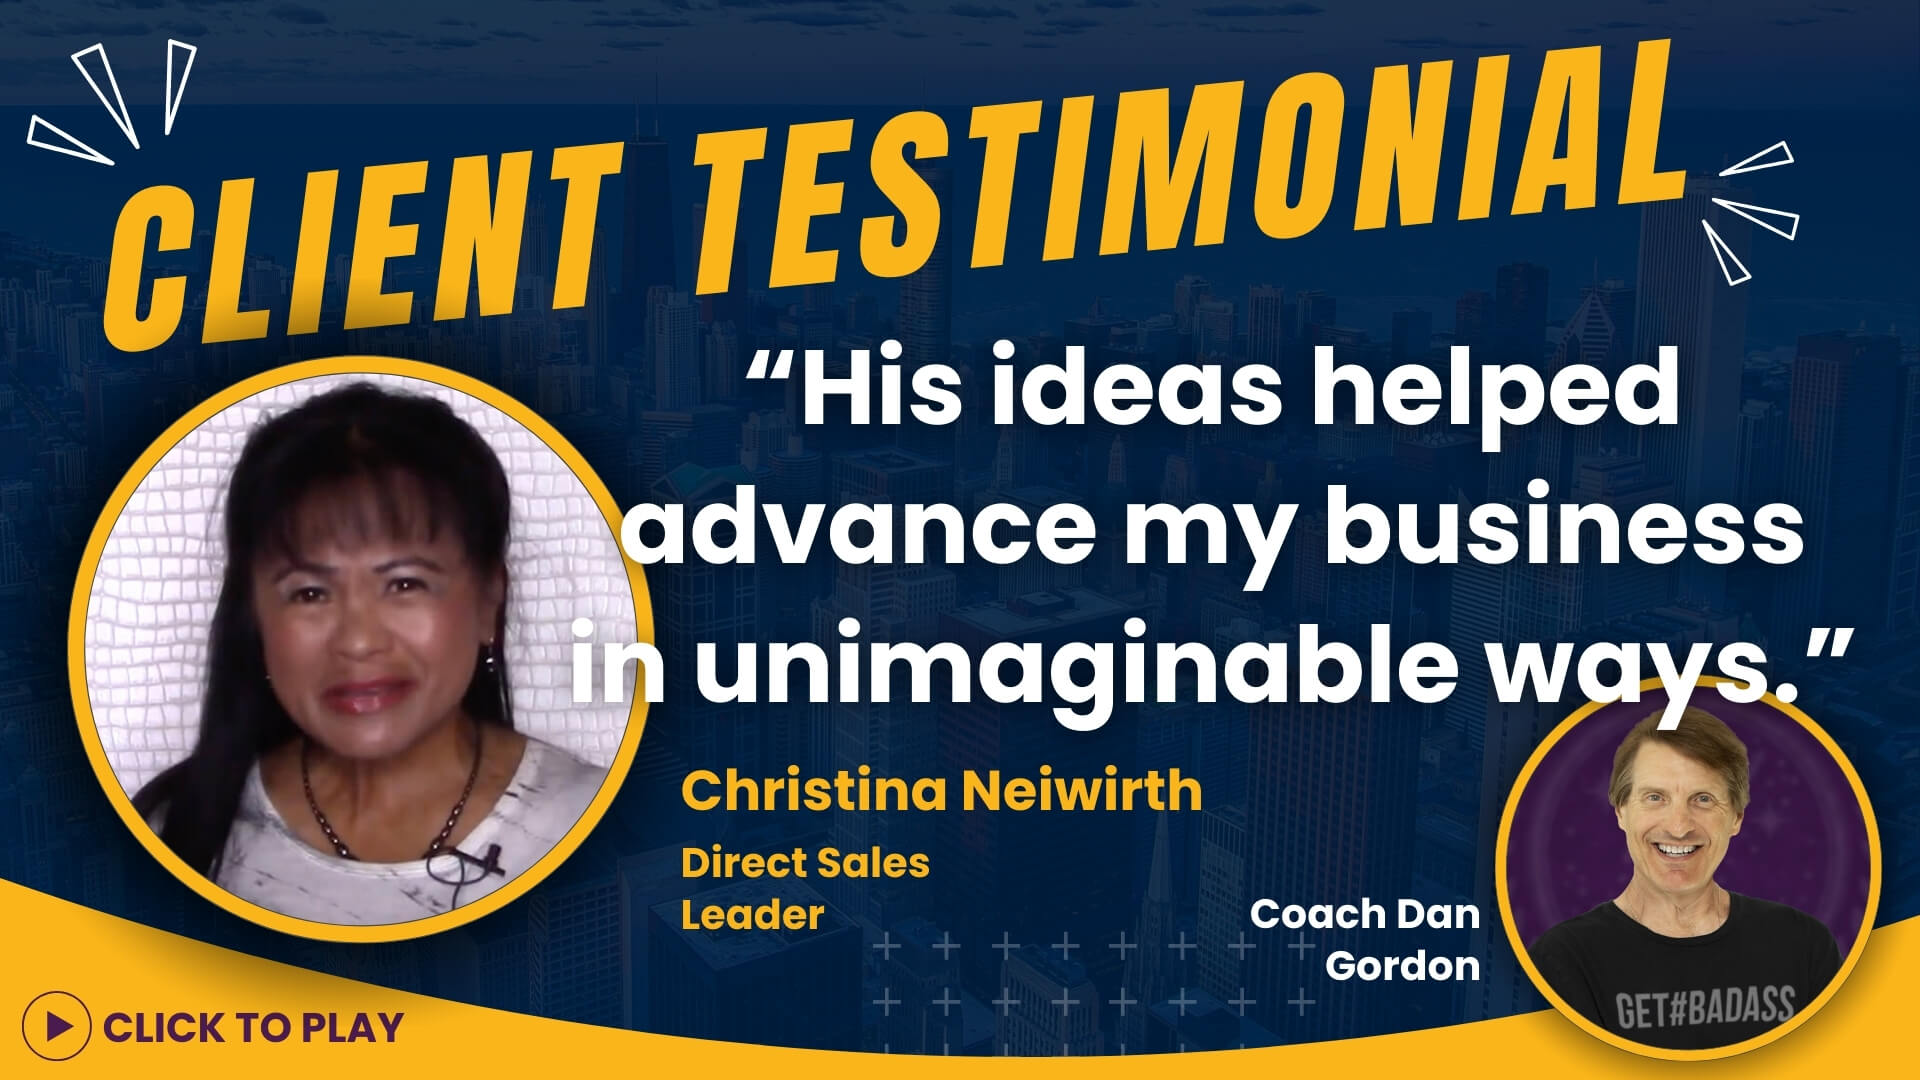 Christina Neiwirth, a Direct Sales Leader, praises Coach Dan Gordon for his visionary ideas that vastly advanced her business, shown with a 'Click to Play' video testimony.